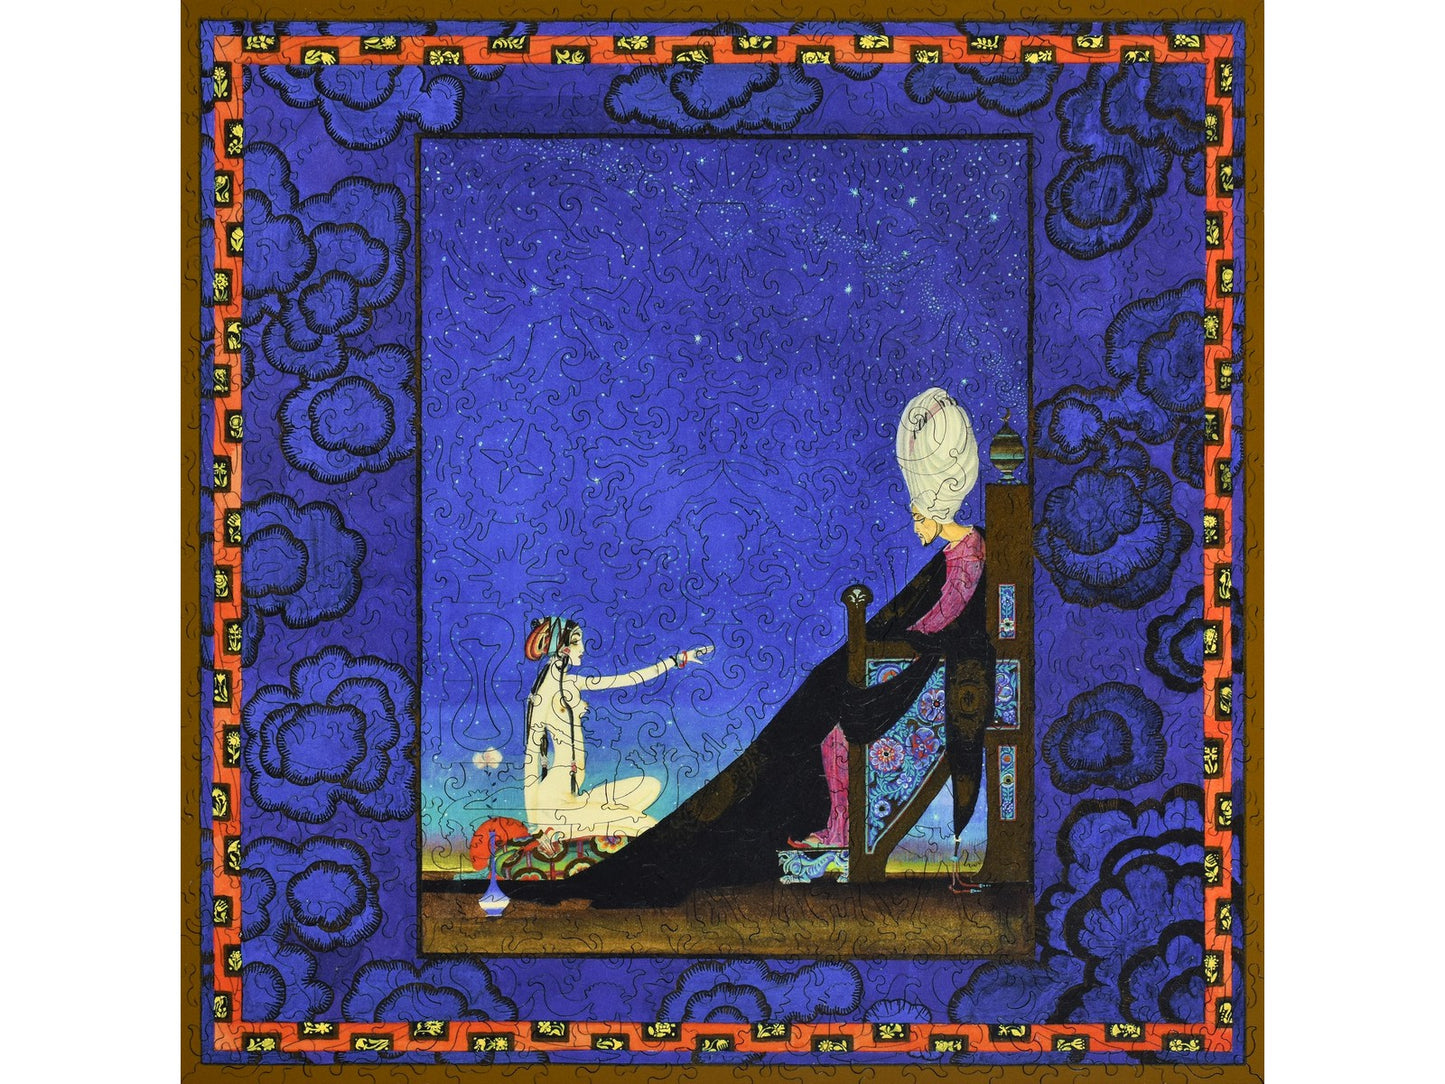 The front of the puzzle, The Story of Scheherazade.